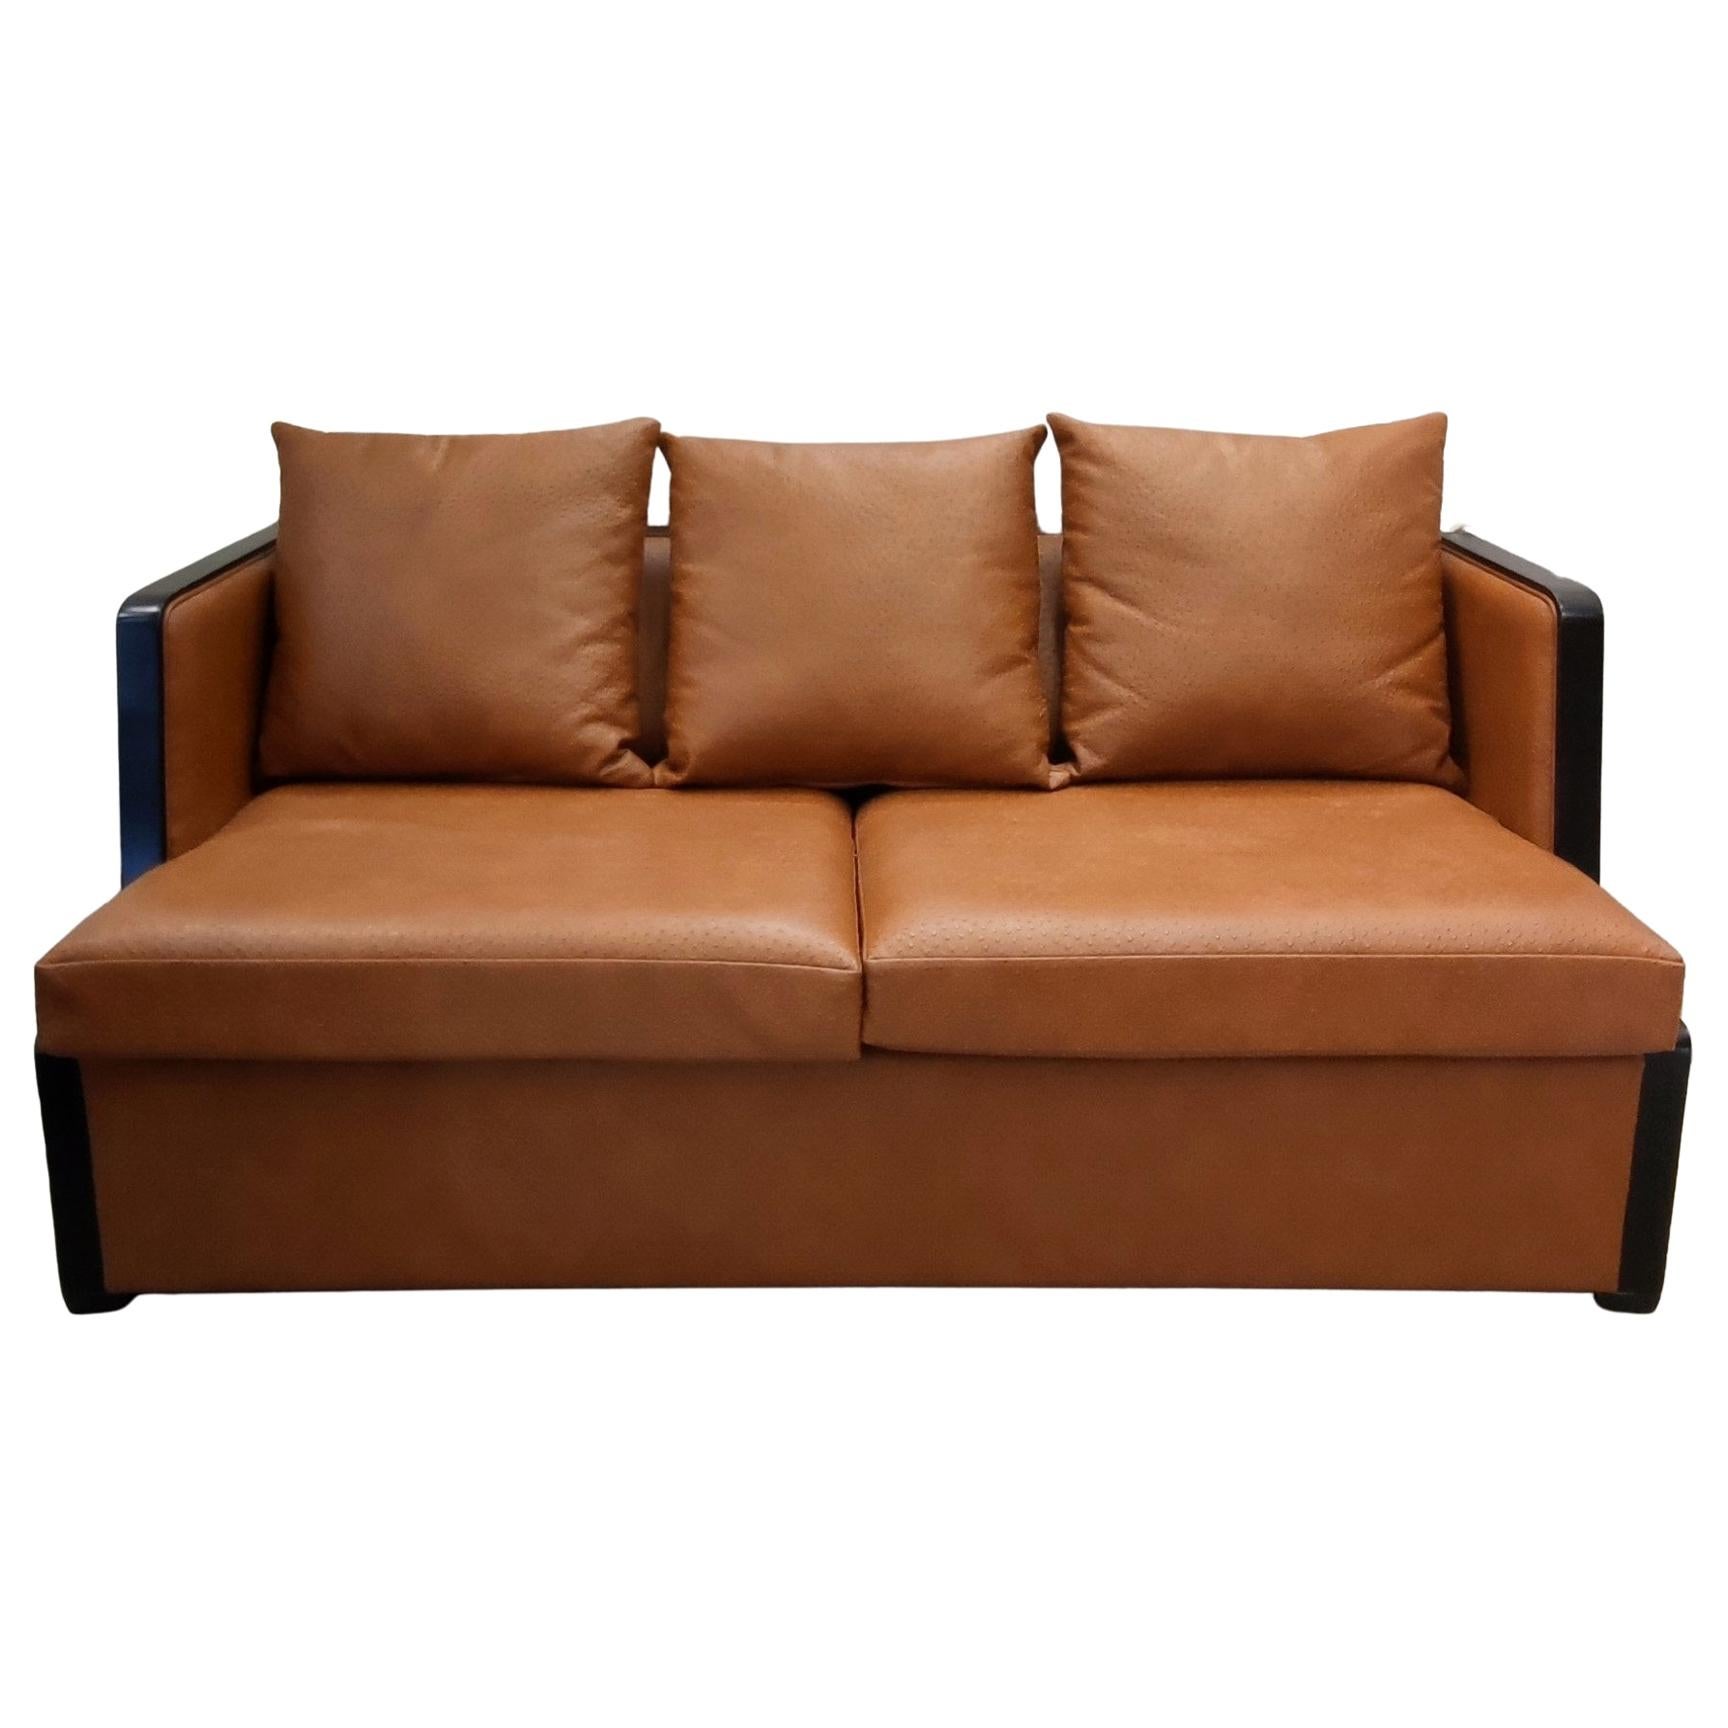 Artdeco Roo Sofabed Black And, Ostrich Leather Couch